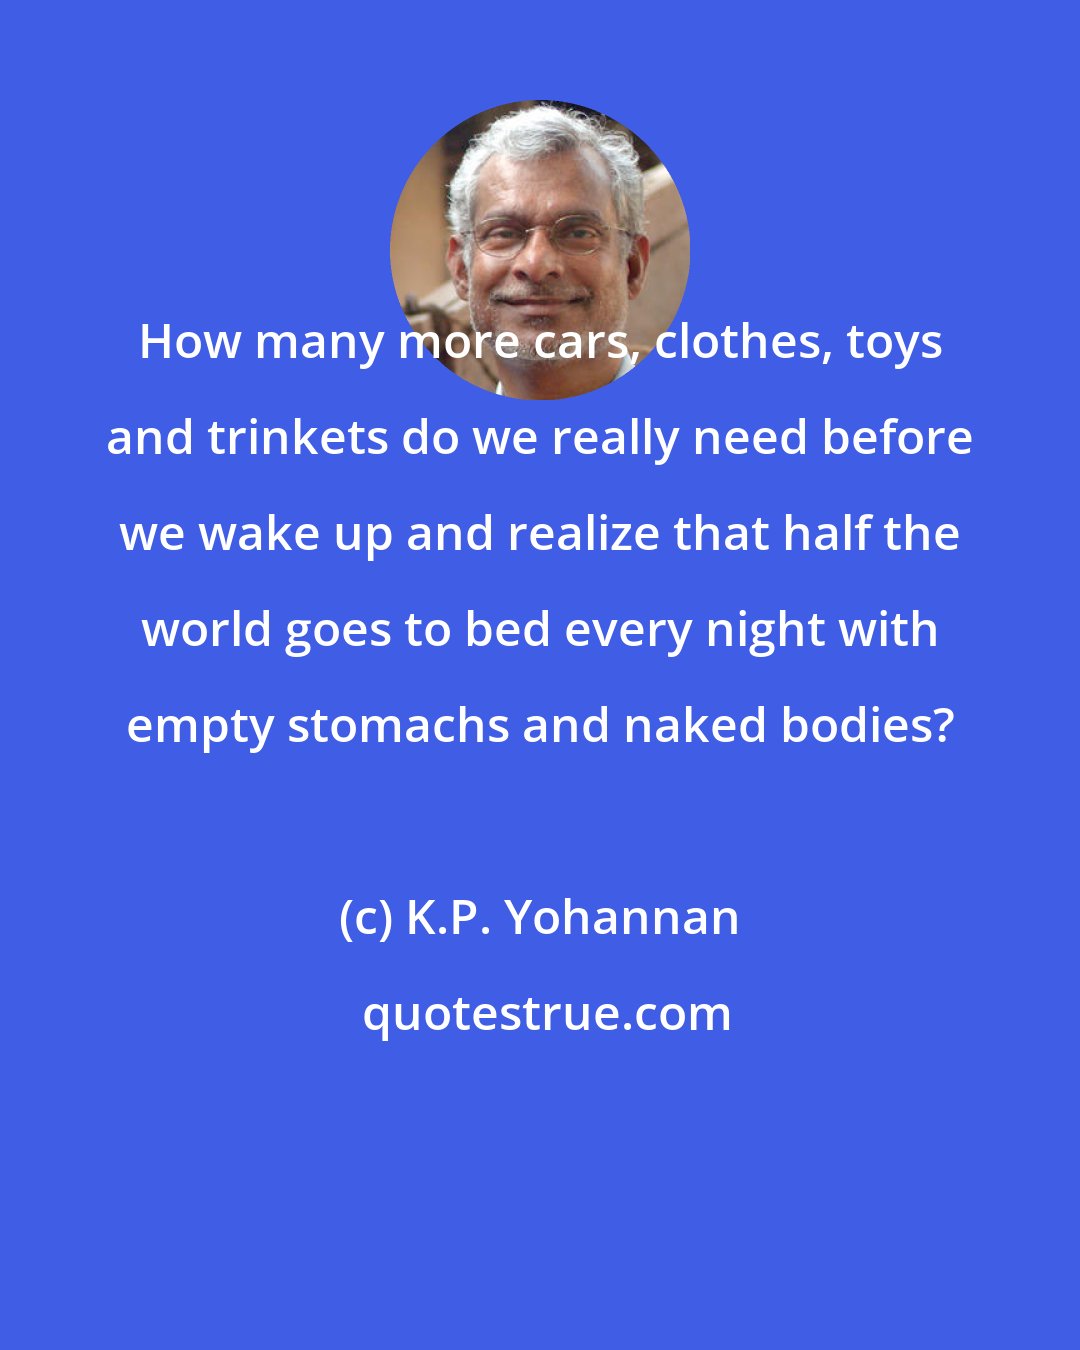 K.P. Yohannan: How many more cars, clothes, toys and trinkets do we really need before we wake up and realize that half the world goes to bed every night with empty stomachs and naked bodies?